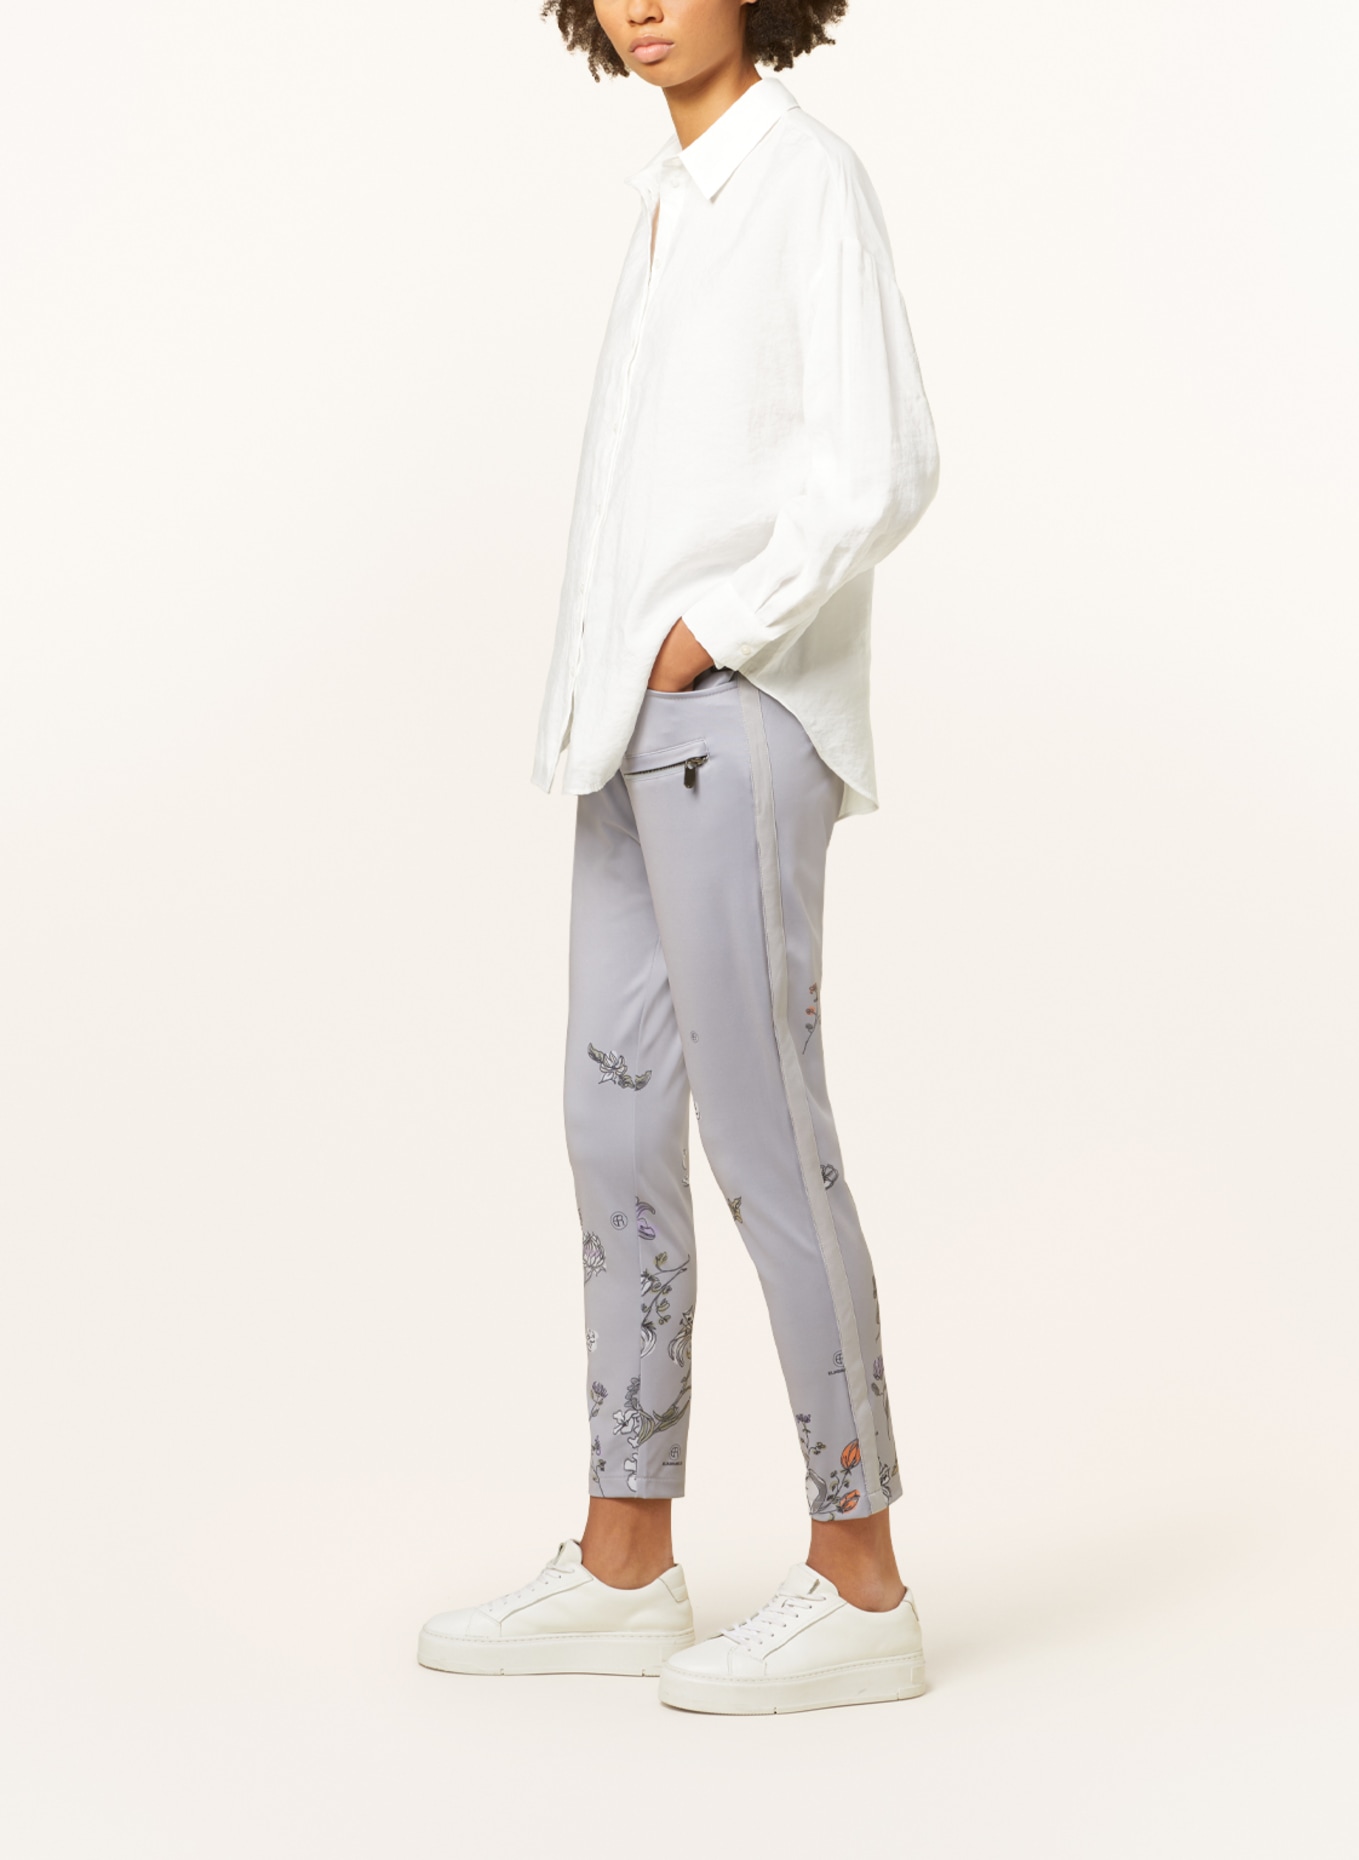 ELIAS RUMELIS Trousers ILENA in jogger style, Color: GRAY (Image 4)